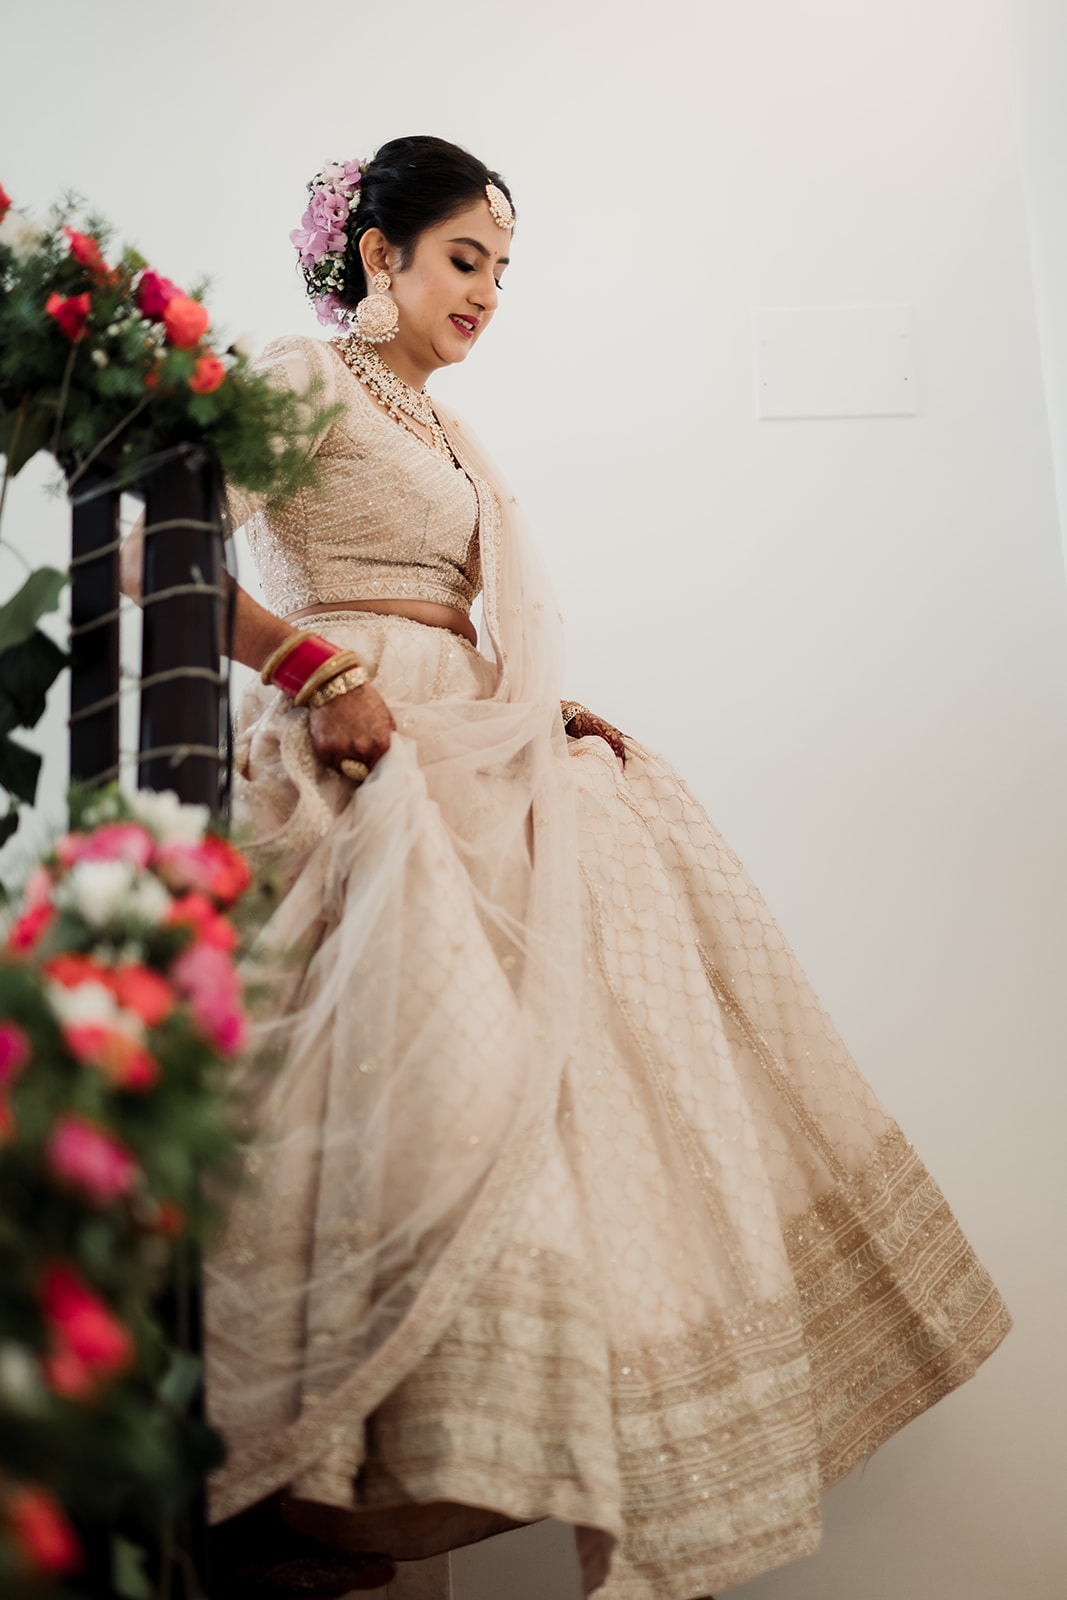 Bridal couture: Capturing the beauty of the bride adorned in a gorgeous and intricate lehenga